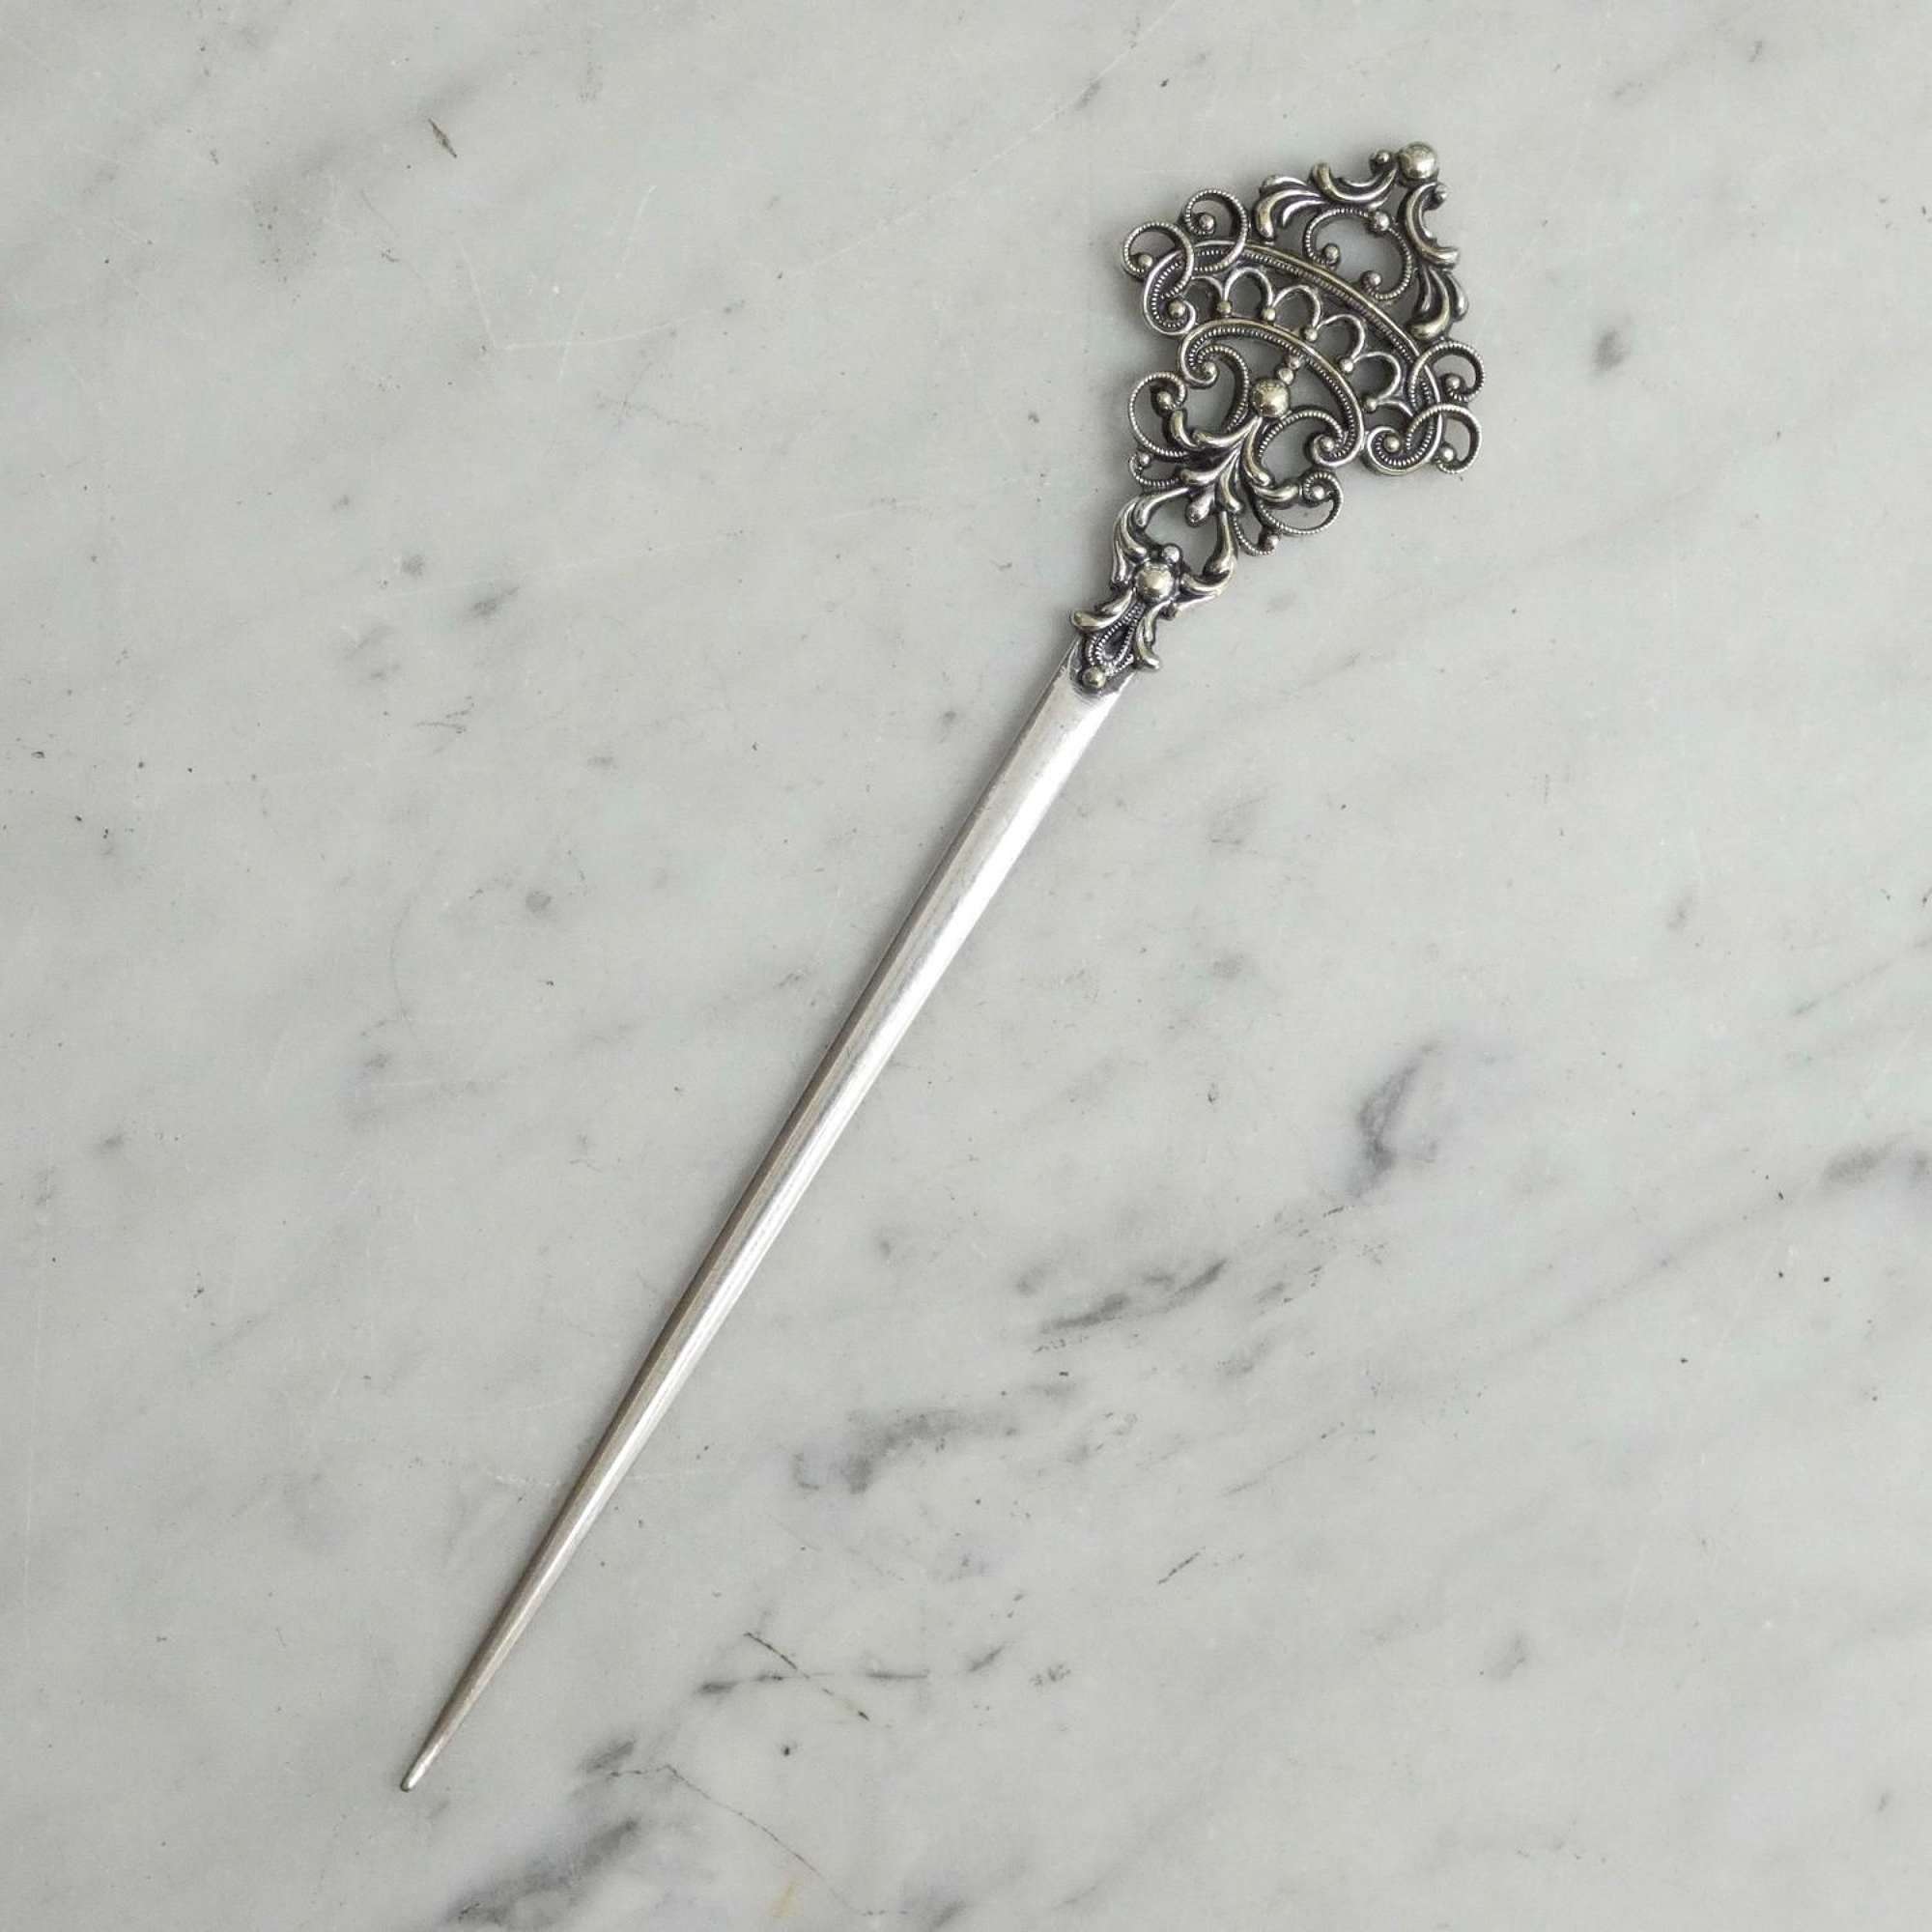 Classical, silver plated skewer